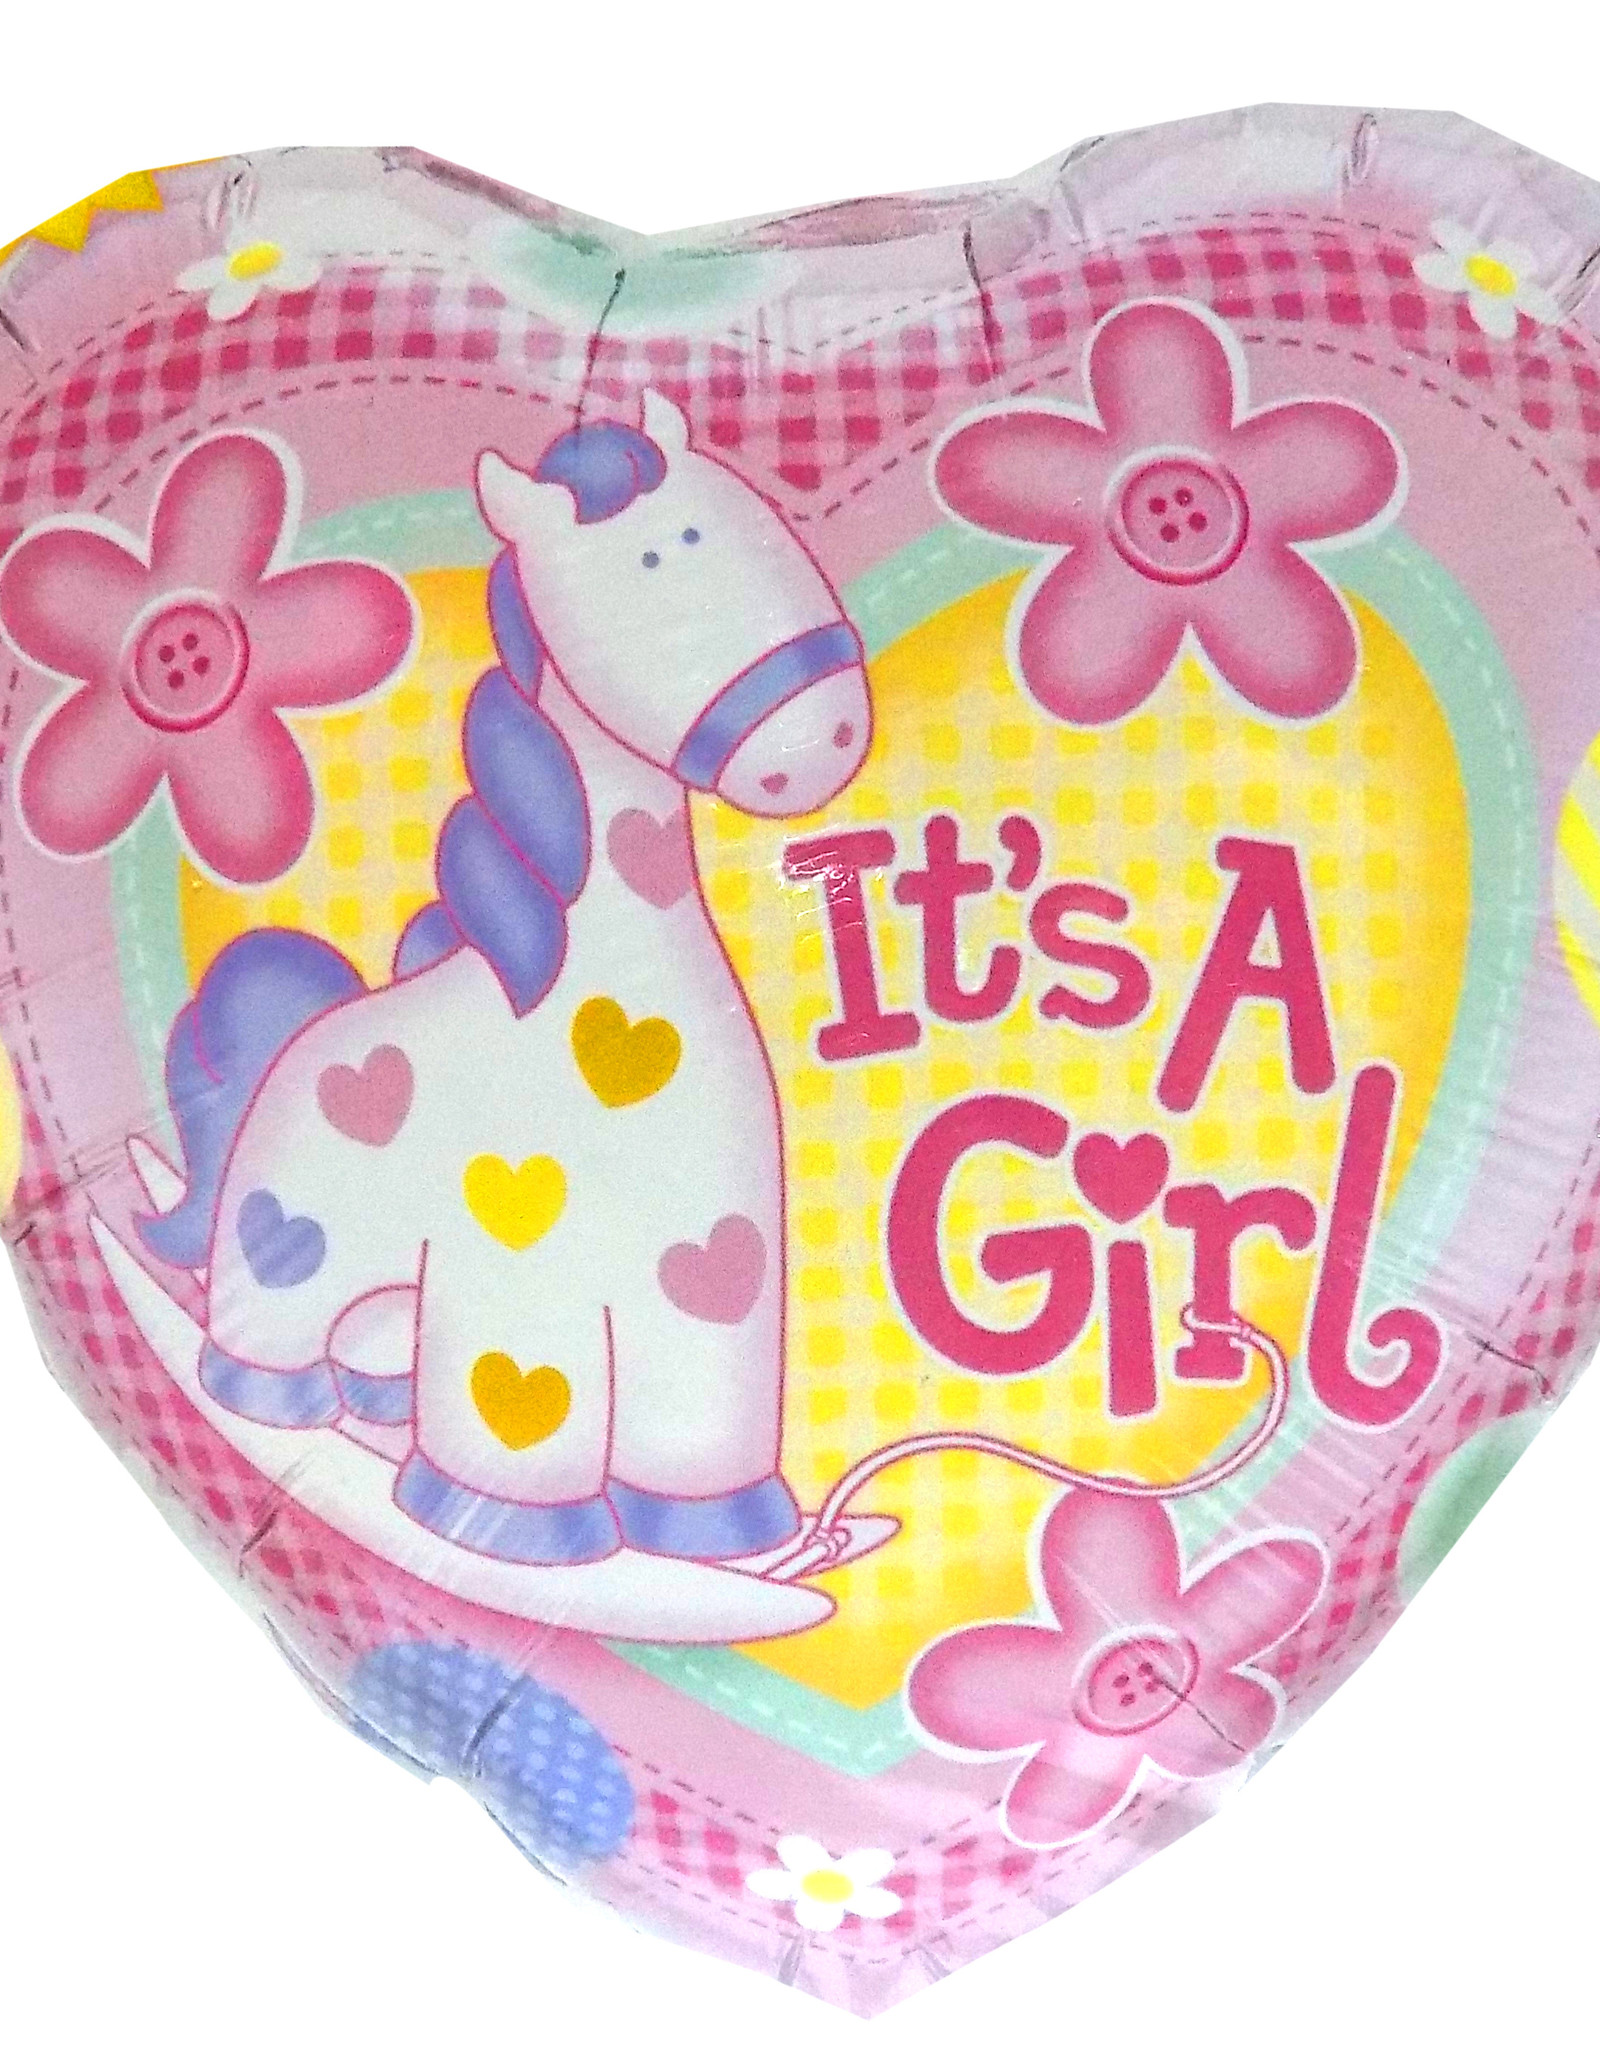 18" 2 Sided Printed Mylar Balloon It's A Girl 2